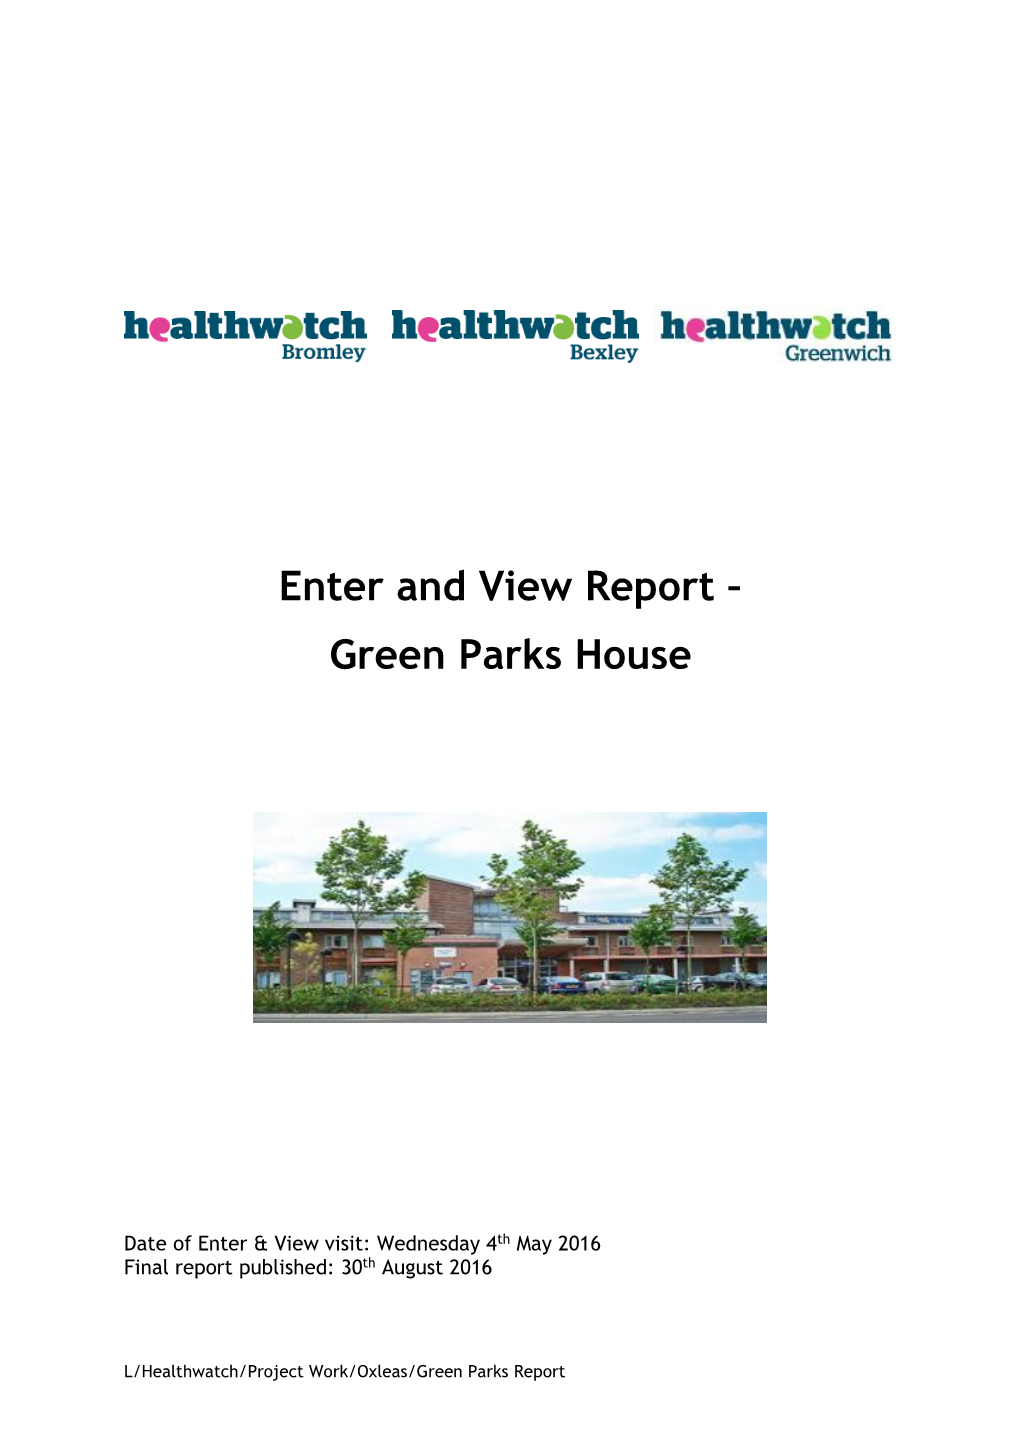 Enter and View Report – Green Parks House